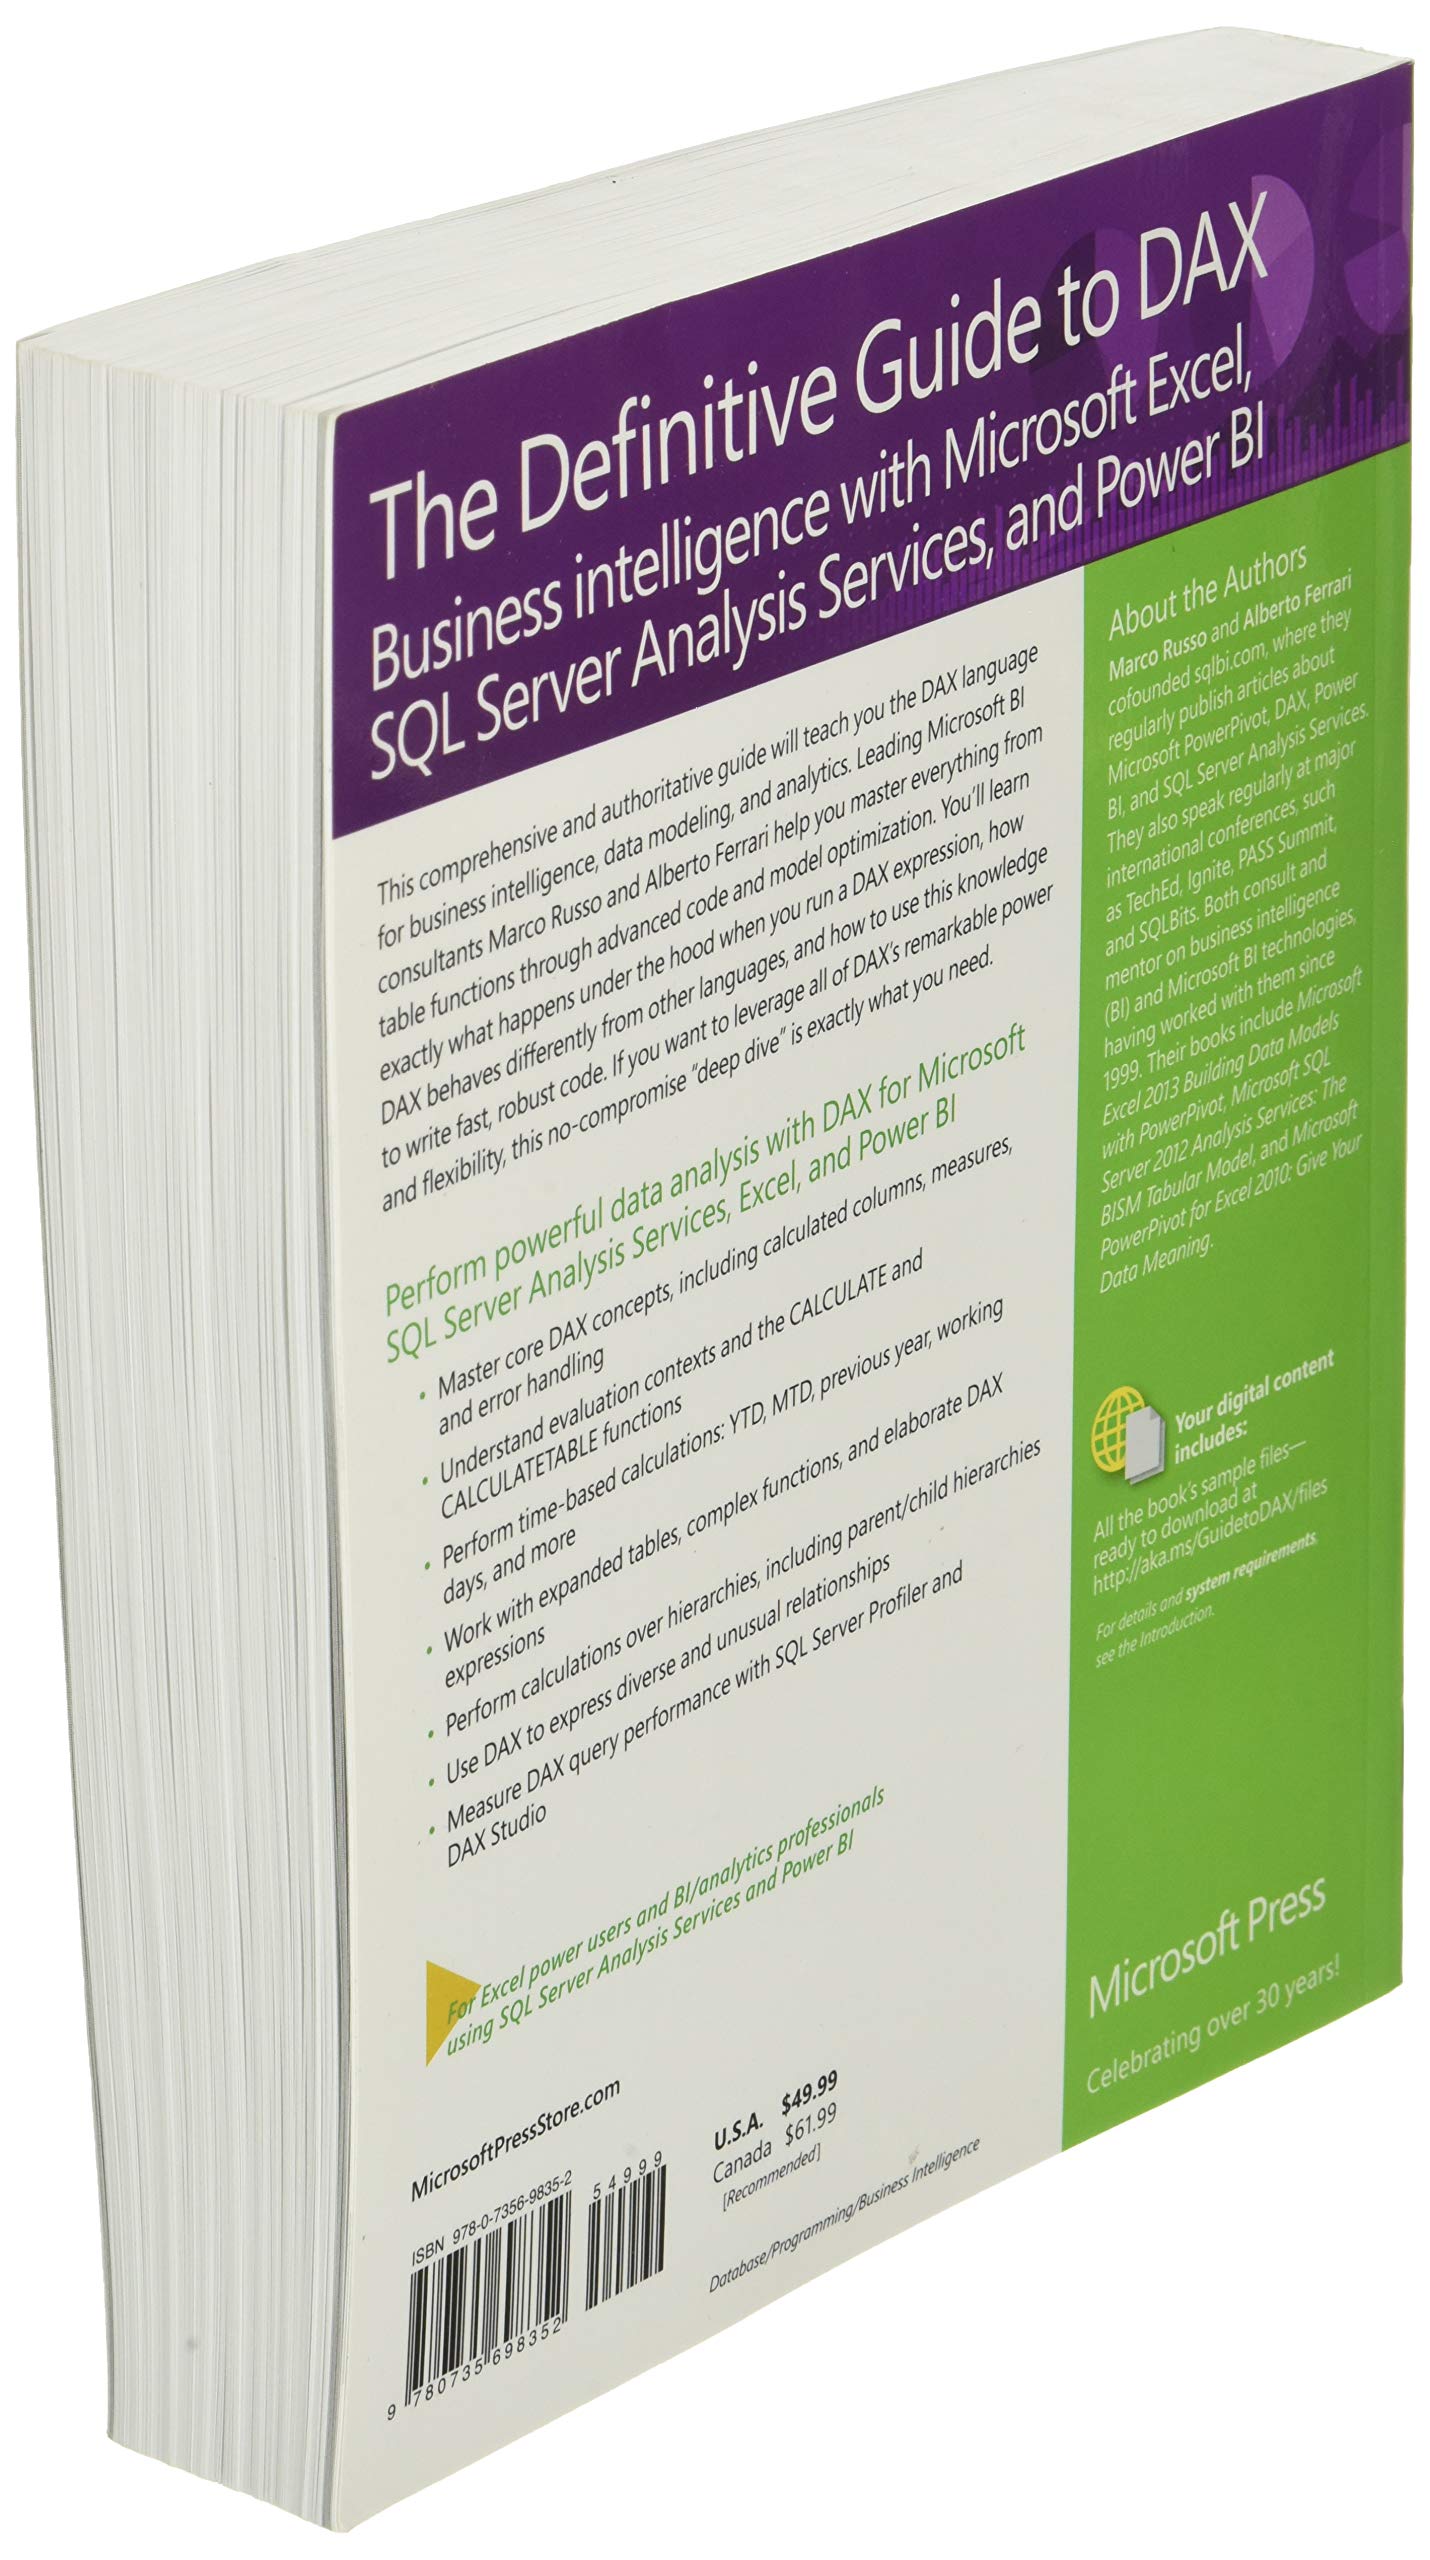 The Definitive Guide To Dax 2nd Edition Pdf Mua Definitive Guide to DAX, The: Business intelligence with Microsoft Excel, SQL Server